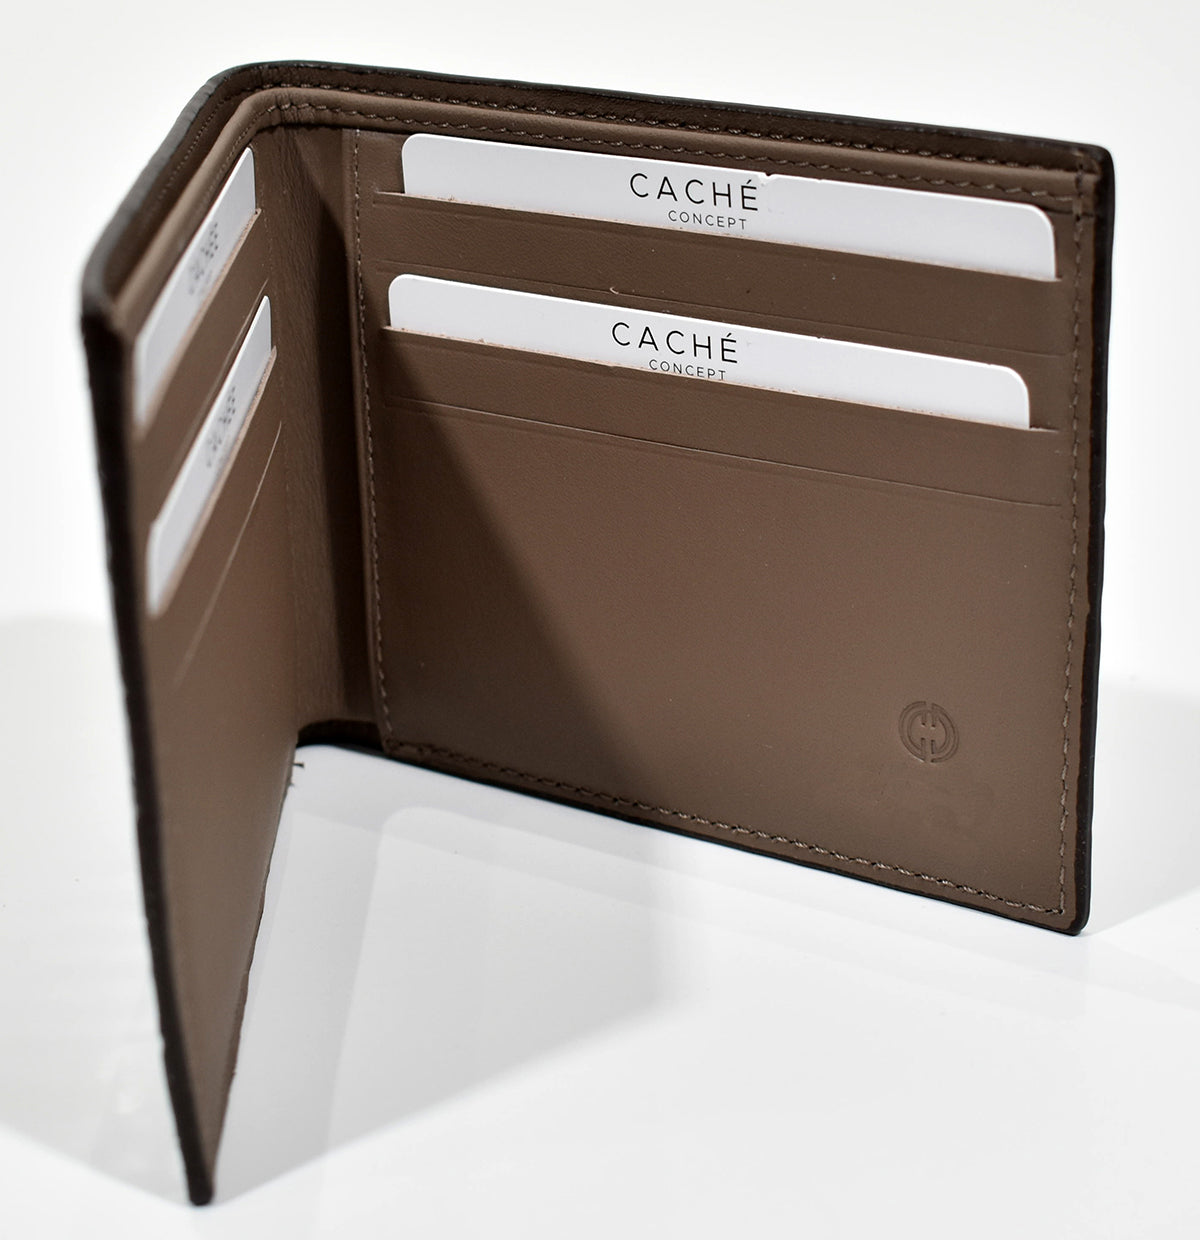 The unmistakable gator pattern stamped on classic leather, with color shading is a great gift idea. Solid leather interior with eight card slots, two hidden slots and a double paper bill section.